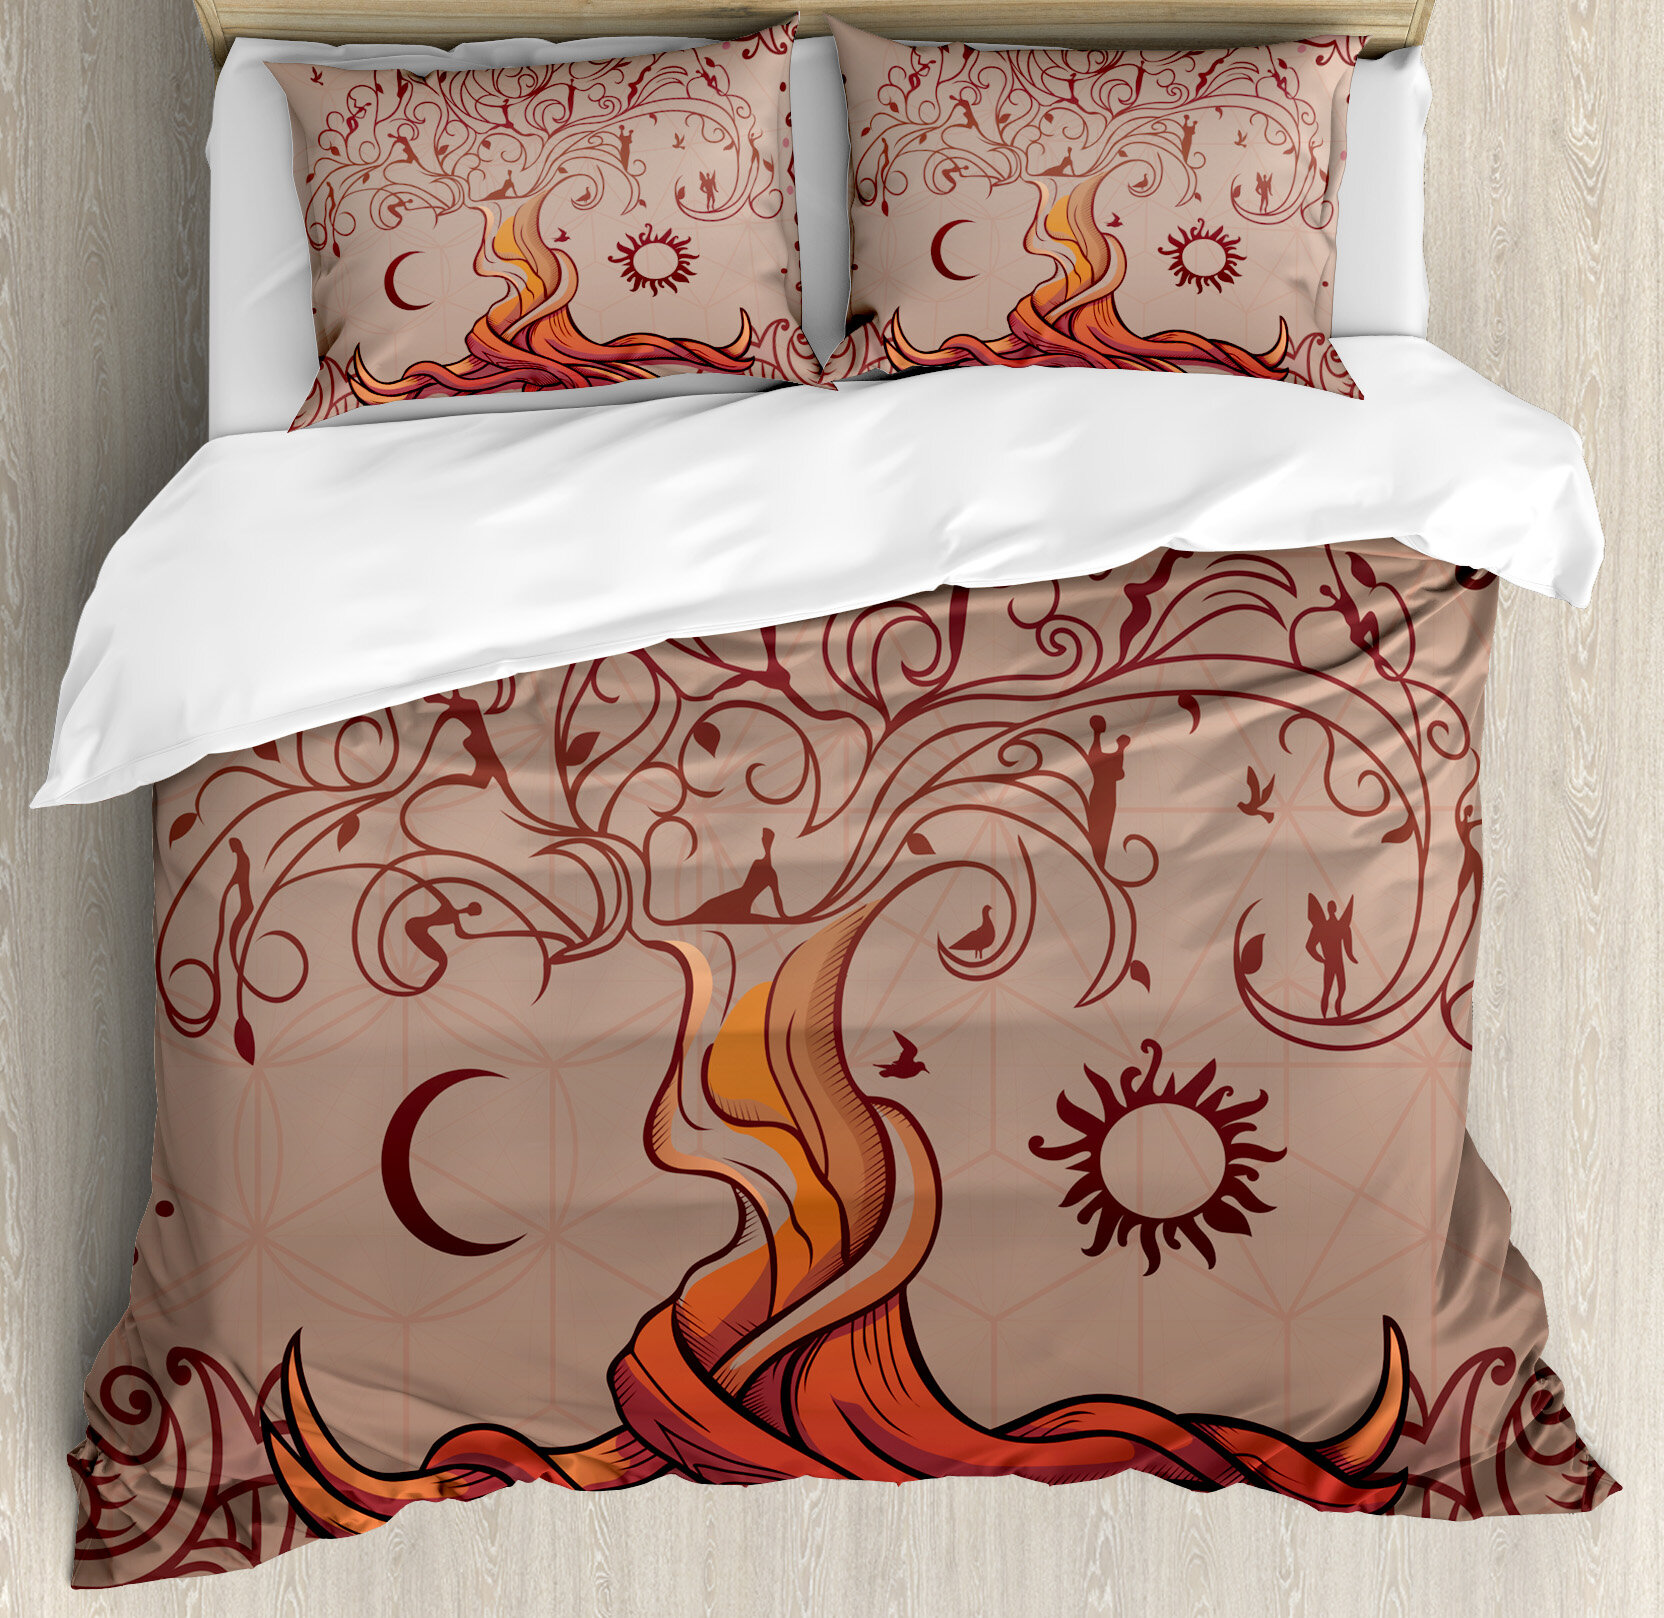 Ambesonne Indian Vintage Tree Of Life With Sun And Moon Duvet